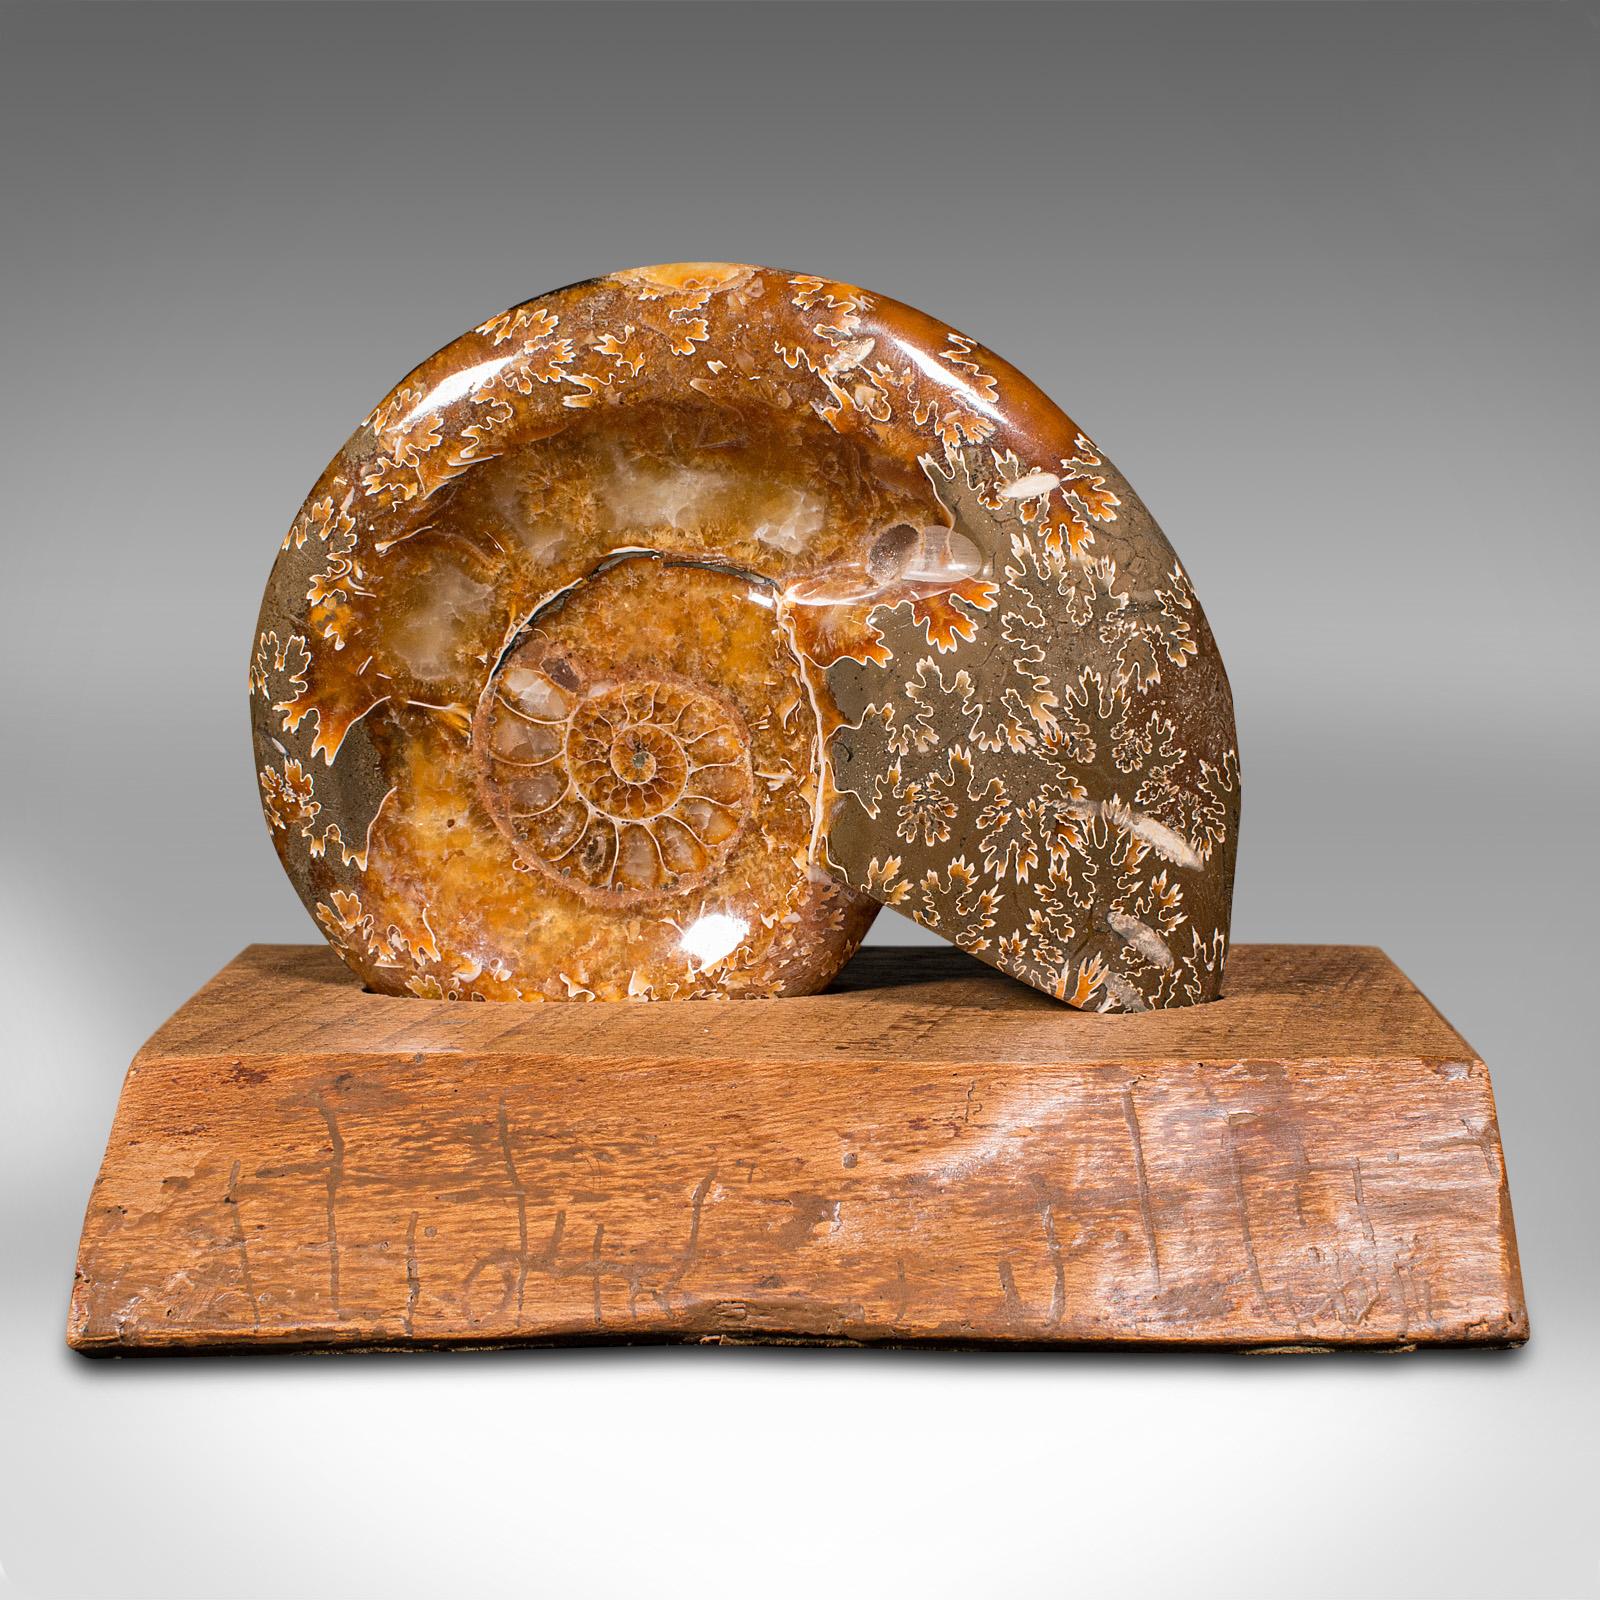 This is a vintage decorative ammonite. An African, opalized fossil on display plinth, dating to millions of years ago, polished and presented, circa 1970. 

Natural beauty and decorative interest to this striking fossil specimen
Displays a